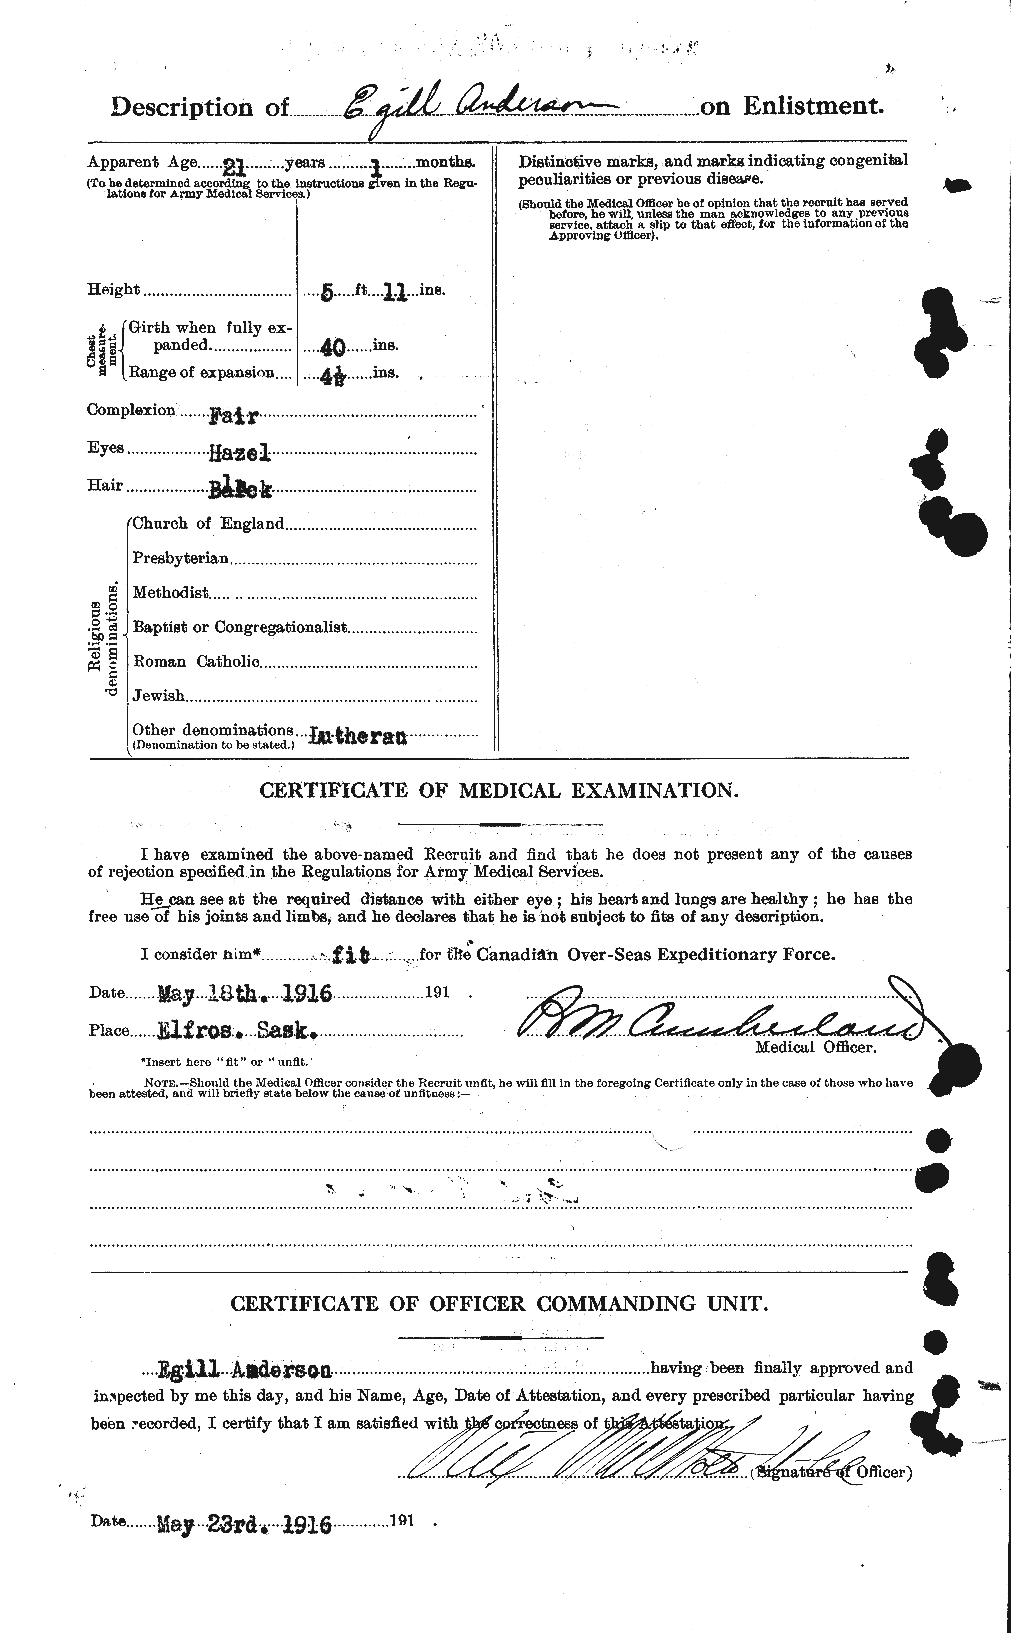 Personnel Records of the First World War - CEF 209924b